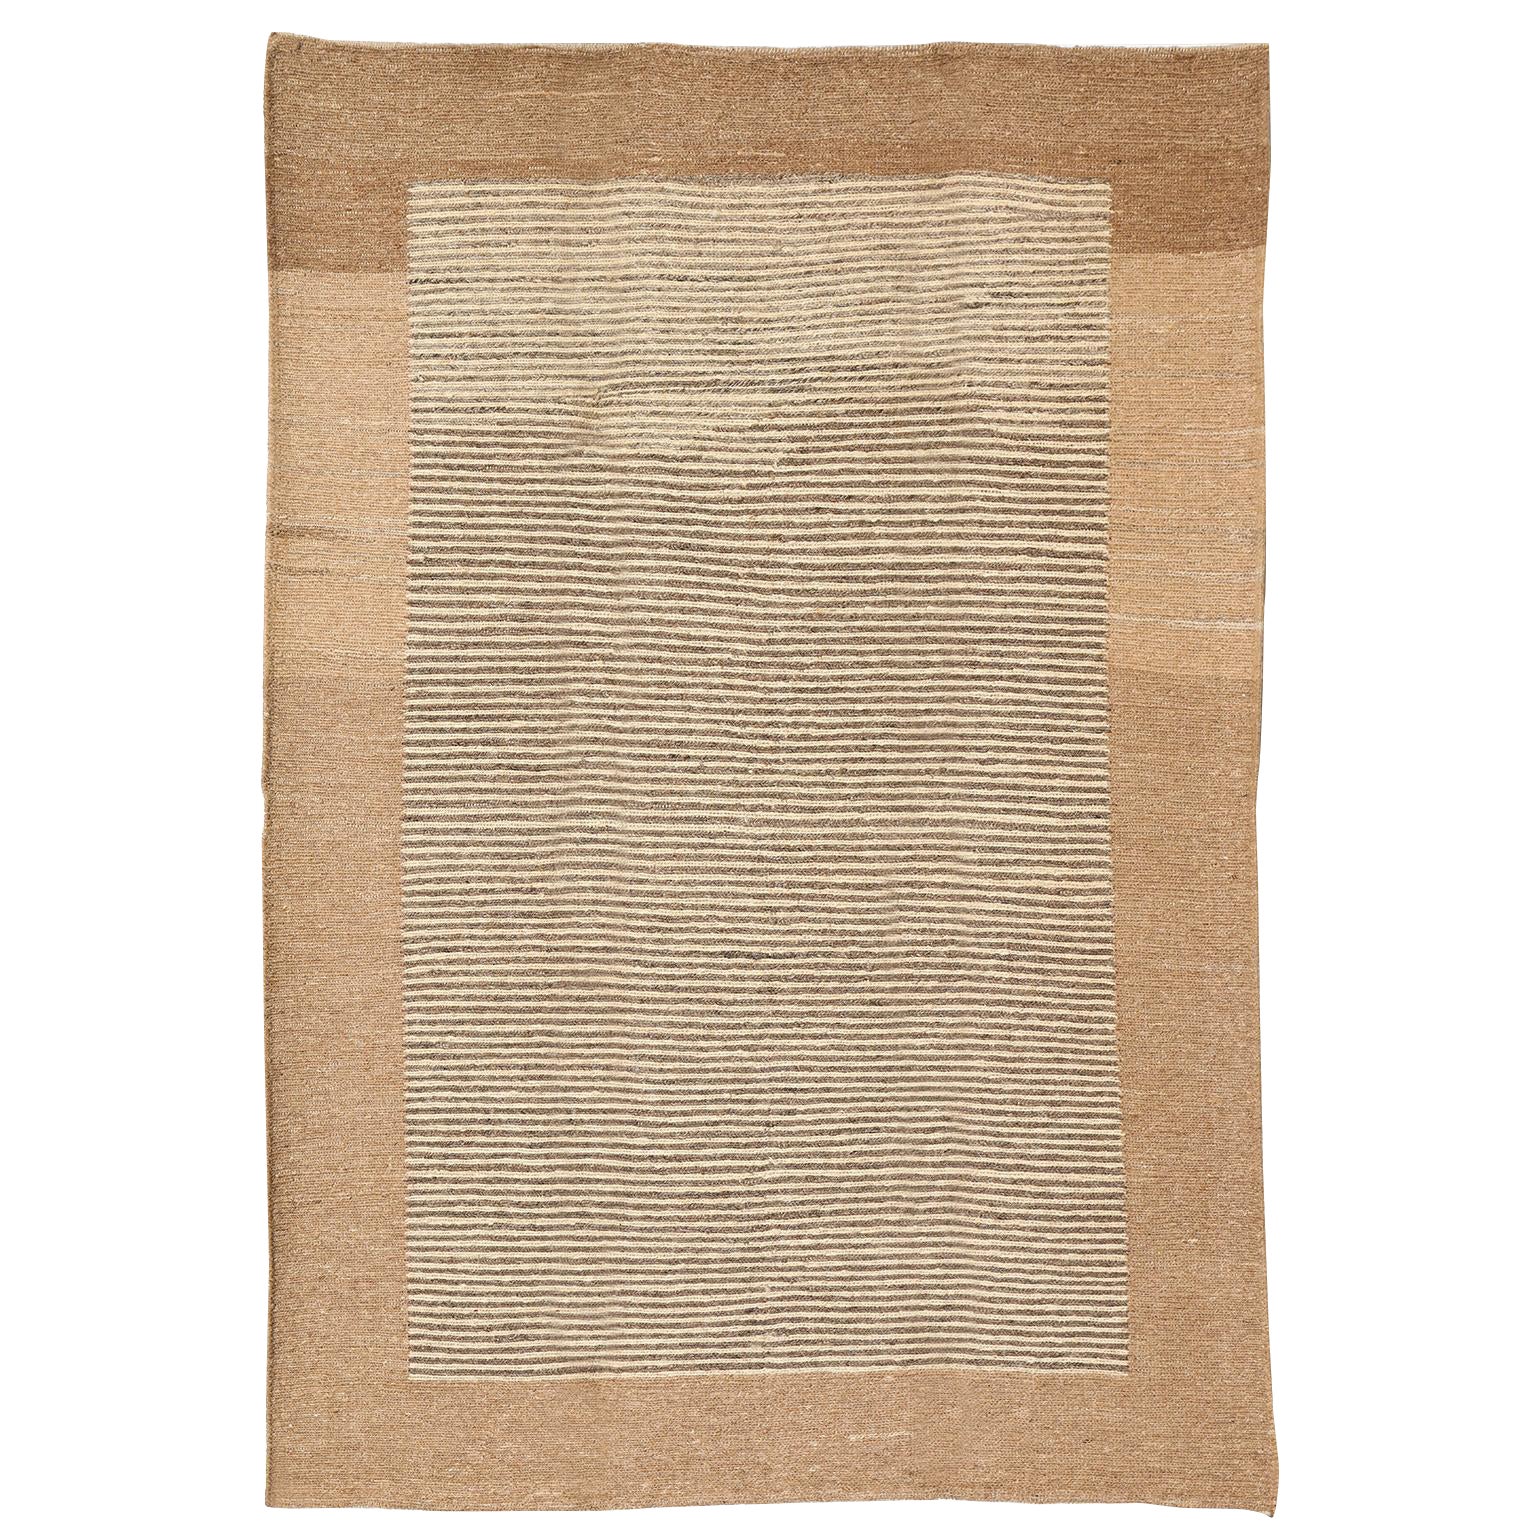 Organic Modern Wool Persian Flat-Weave Rug, Neutral, Orley Shabahang, 5' x 7' For Sale